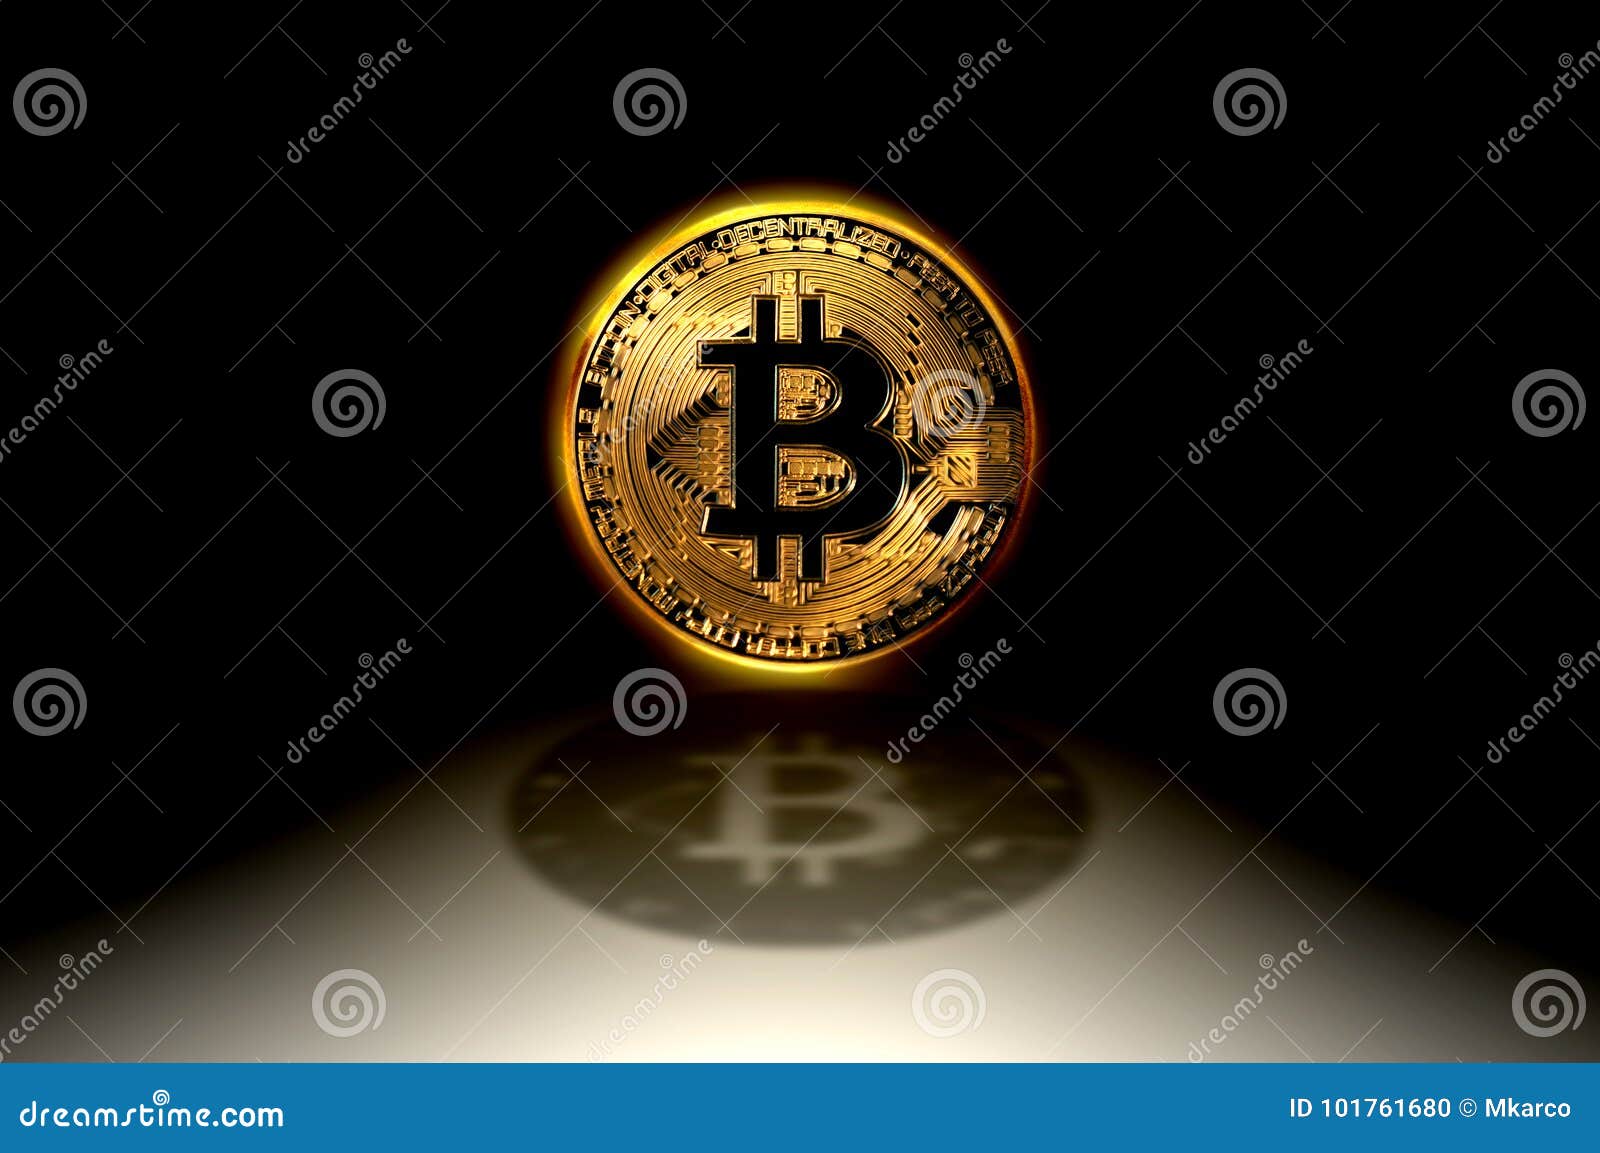 Bitcoin Gold Coin, The Worldwide Crypto Currency And Digital Payment